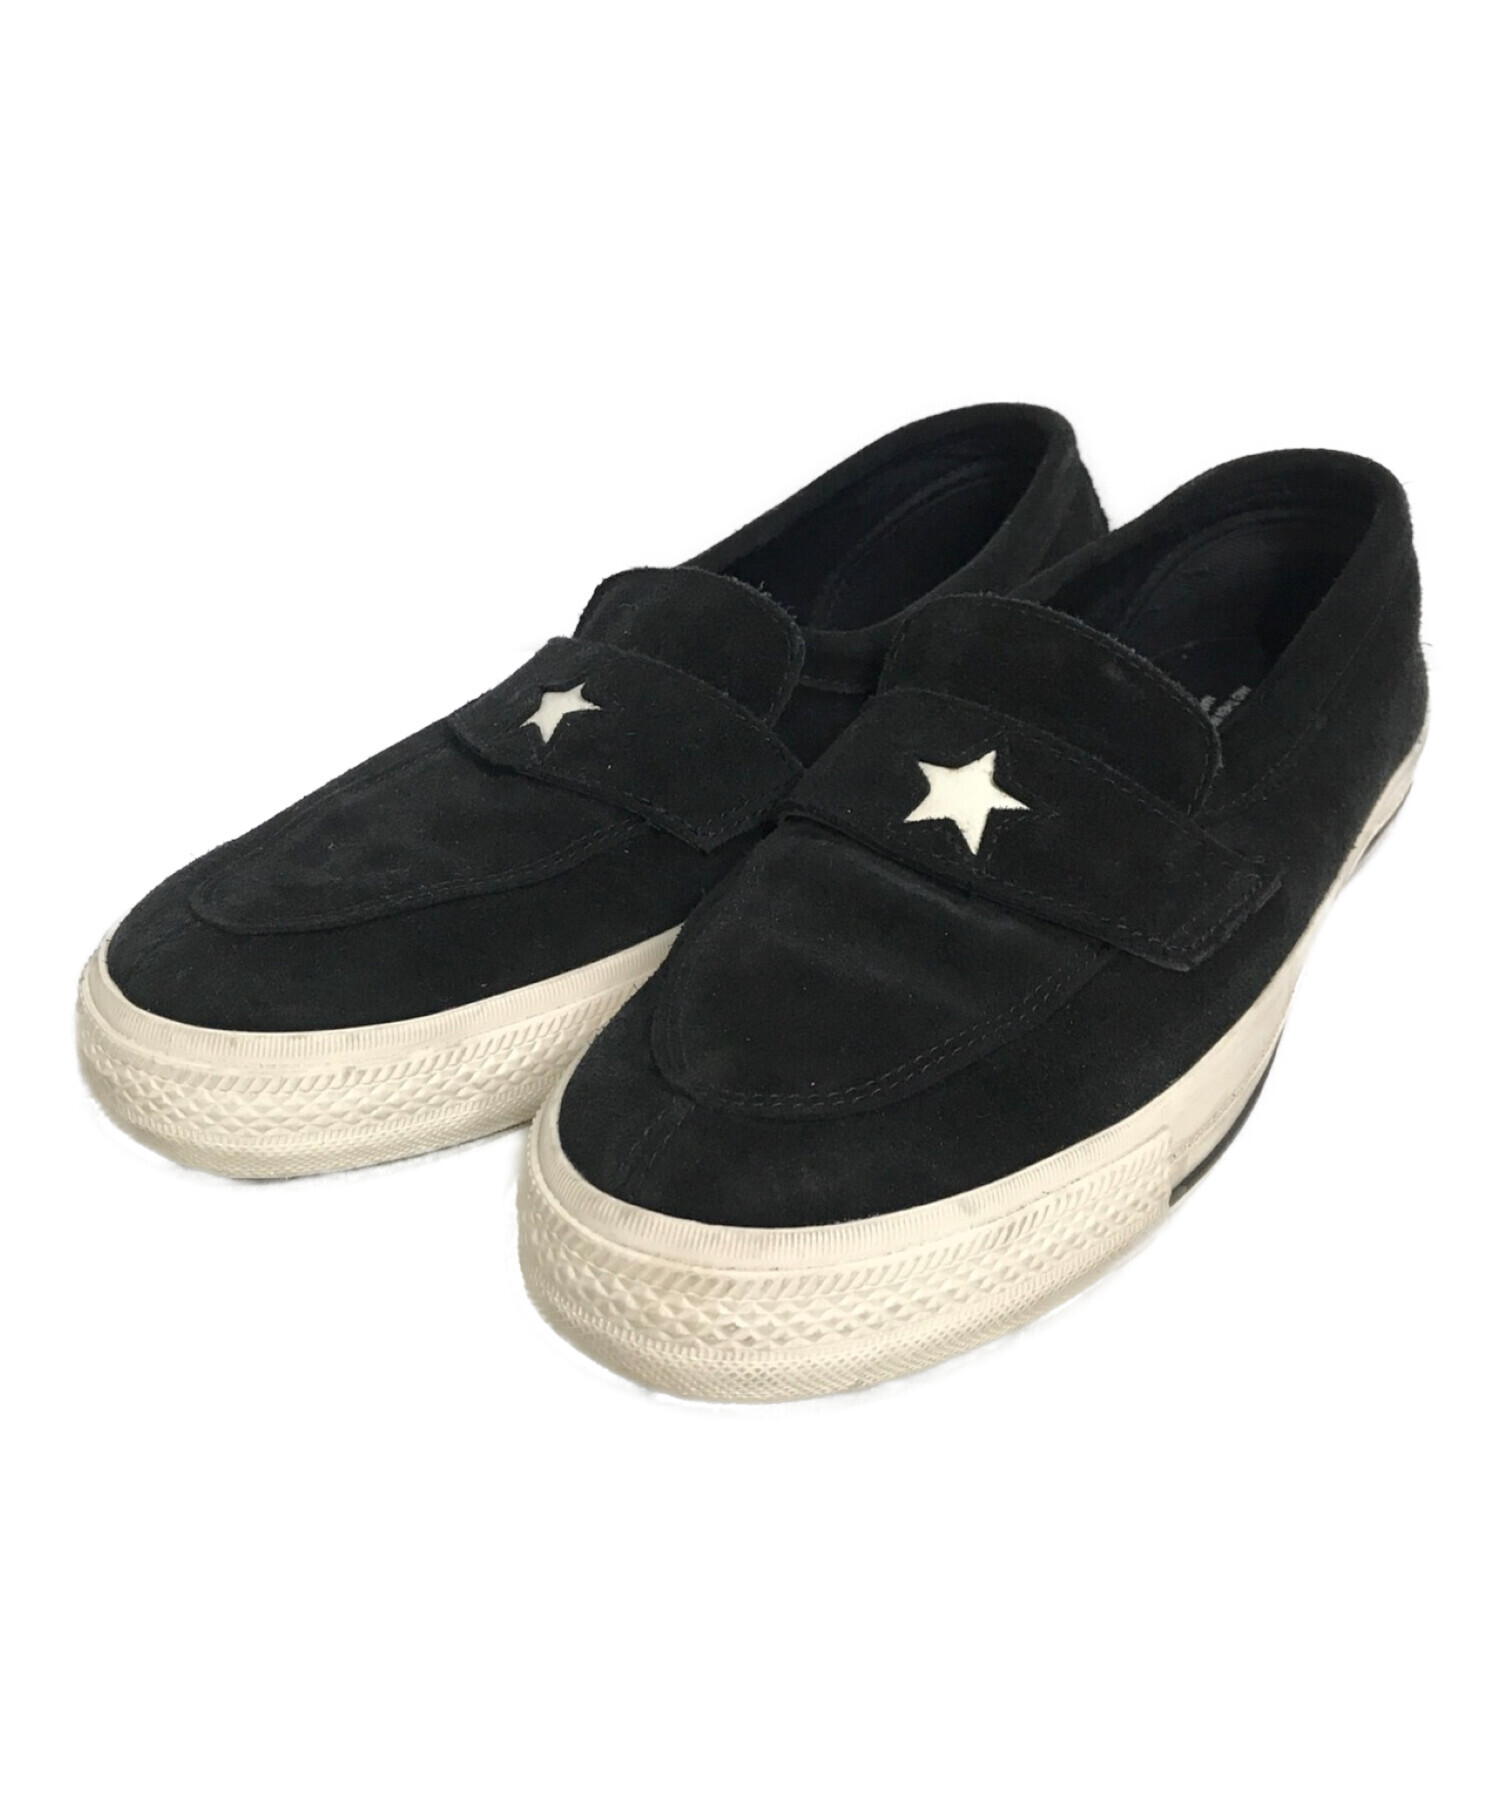 NEXUS7×CONVERSE Addict ONE STAR LOAFER 黒PANTYD